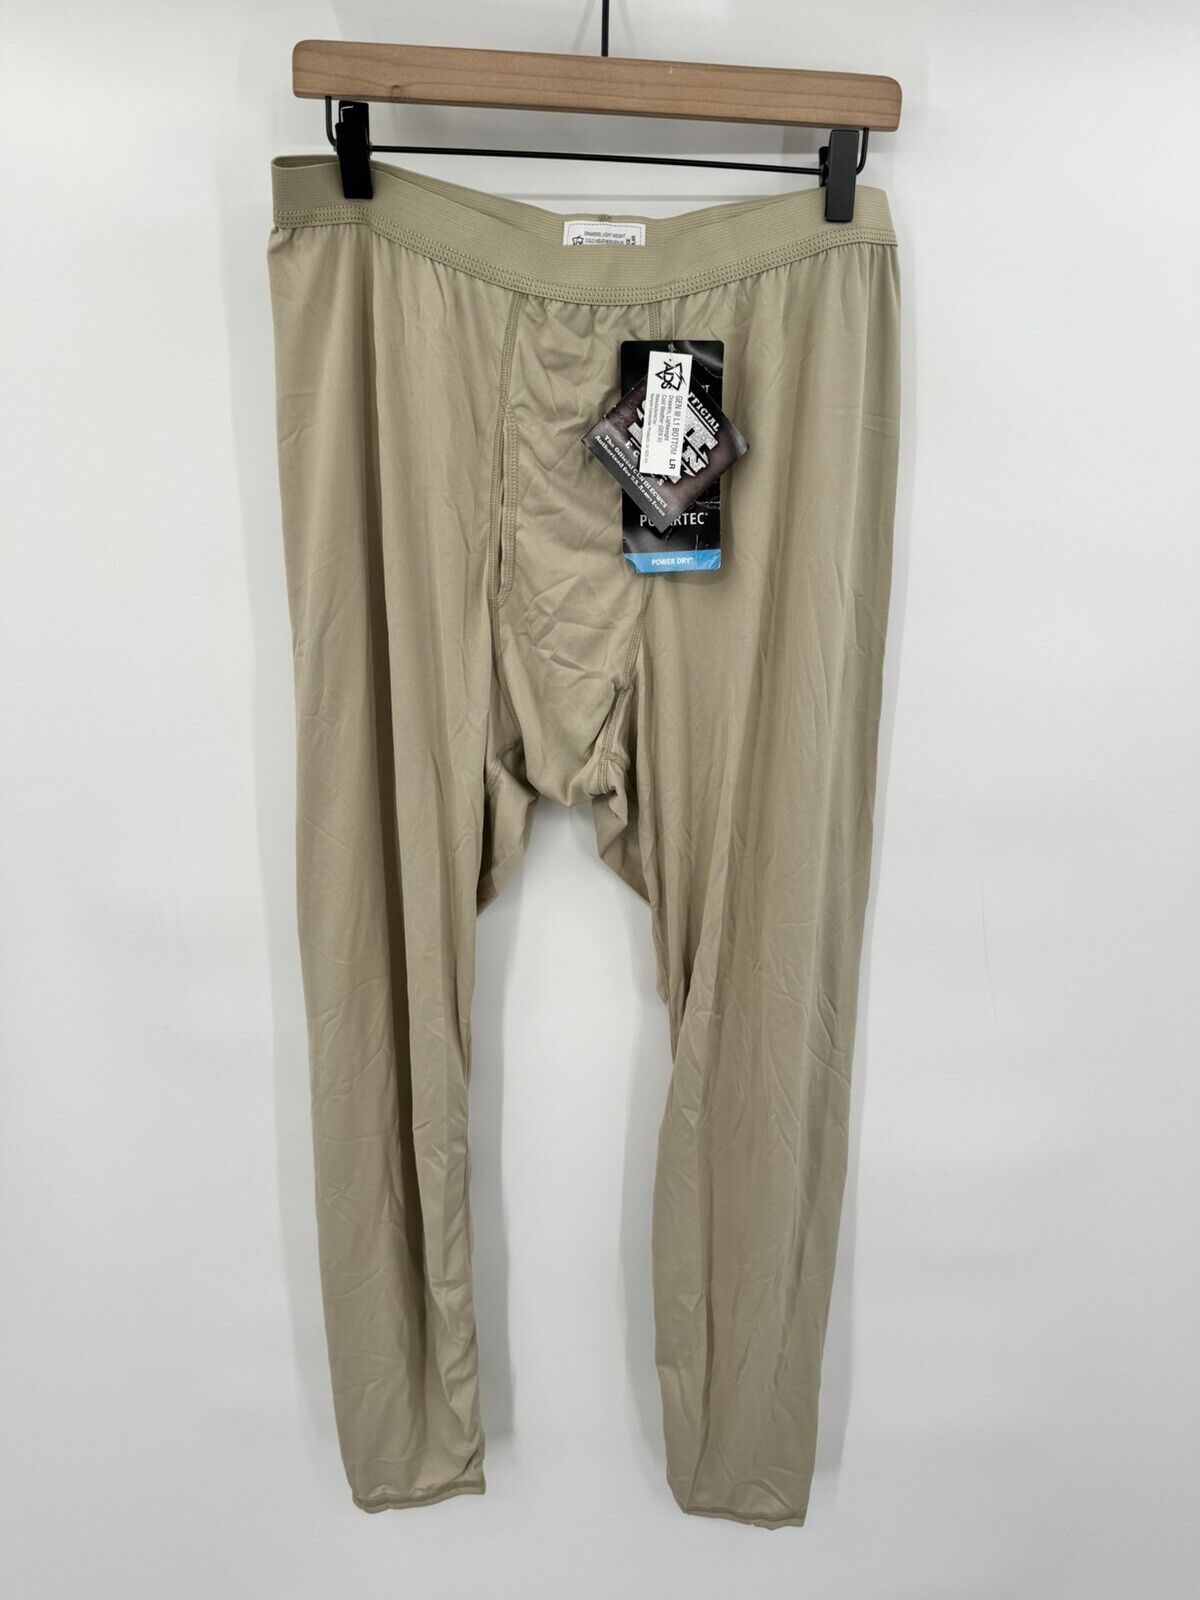 NEW Official Gen III Pants Mens Large Drawers Lightweight Cold Weather Polartec